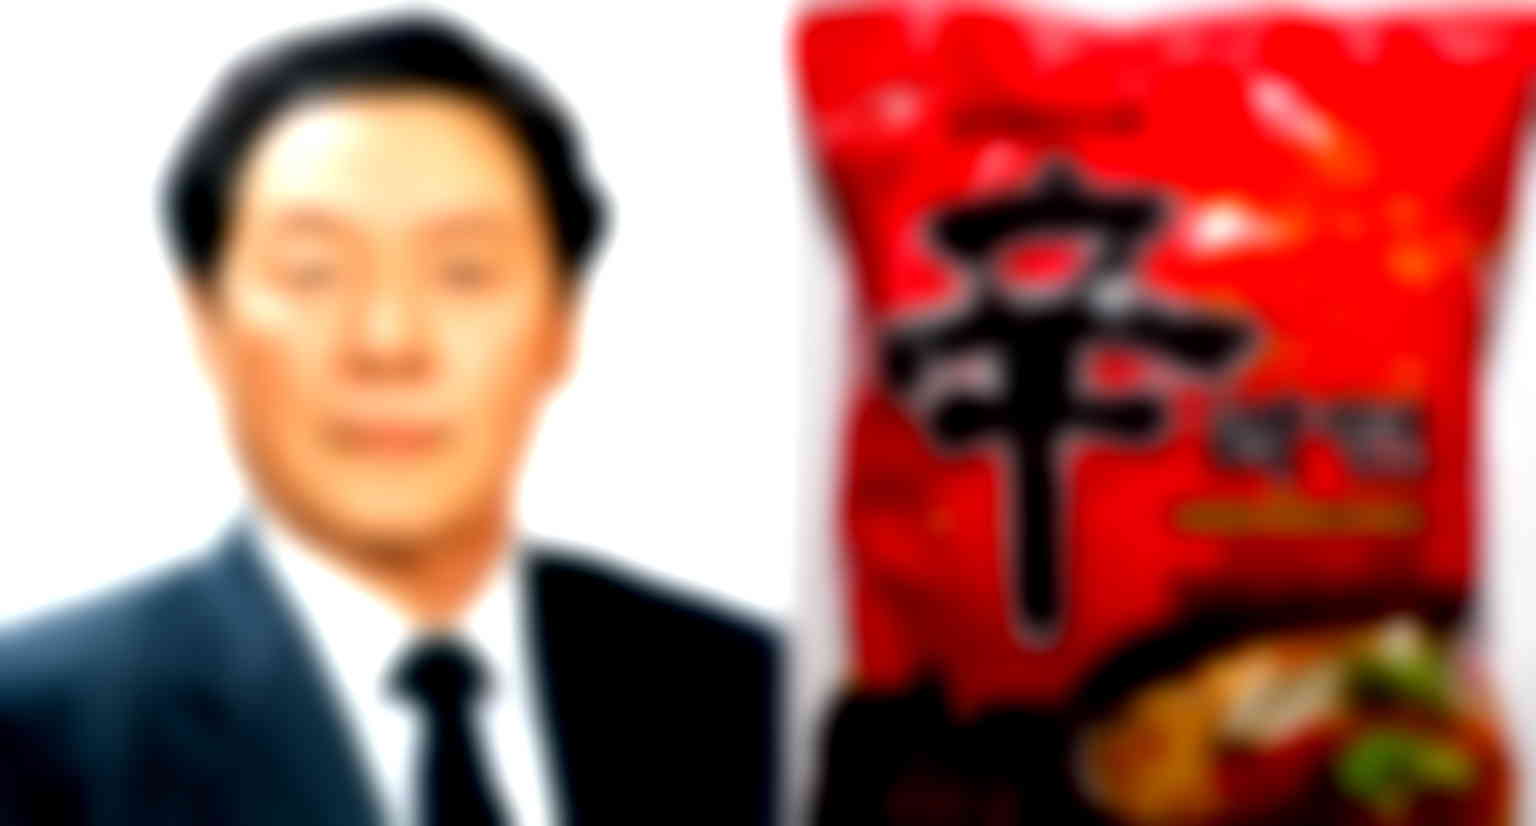 South Korea’s ‘King of Instant Noodles’ Passes Away at 91